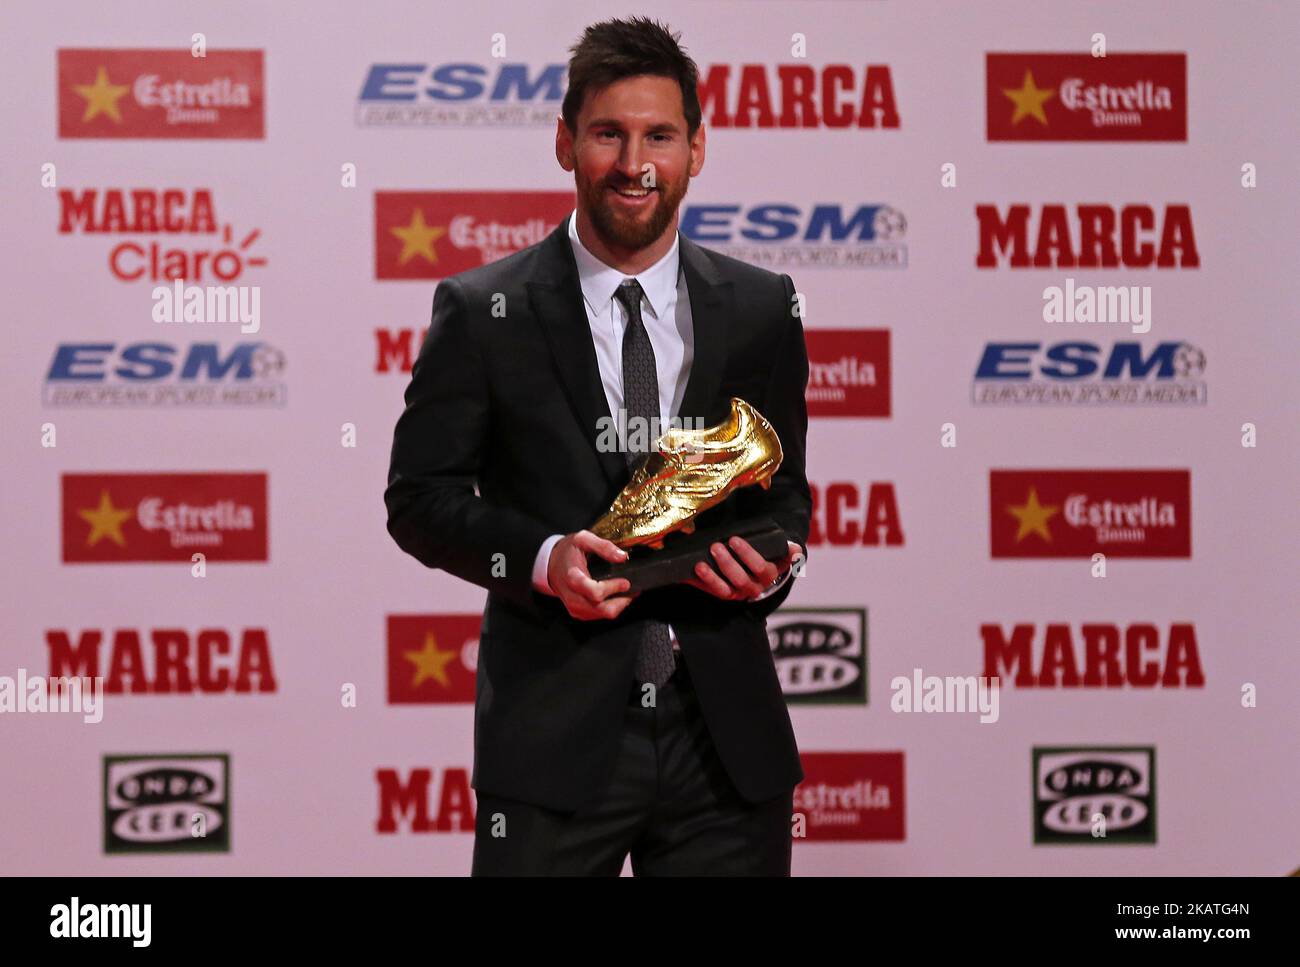 Lionel Messi receives his fourth Golden Boot award on November 24, 2017 for leading all of Europe's leagues in scoring last season. It was his fourth award matching Cristiano Ronaldo as the award record-holders; Messi won the award by Scoring 37 goals in the Spanish league in 2016-17 season (Photo by Urbanandsport/NurPhoto) Stock Photo